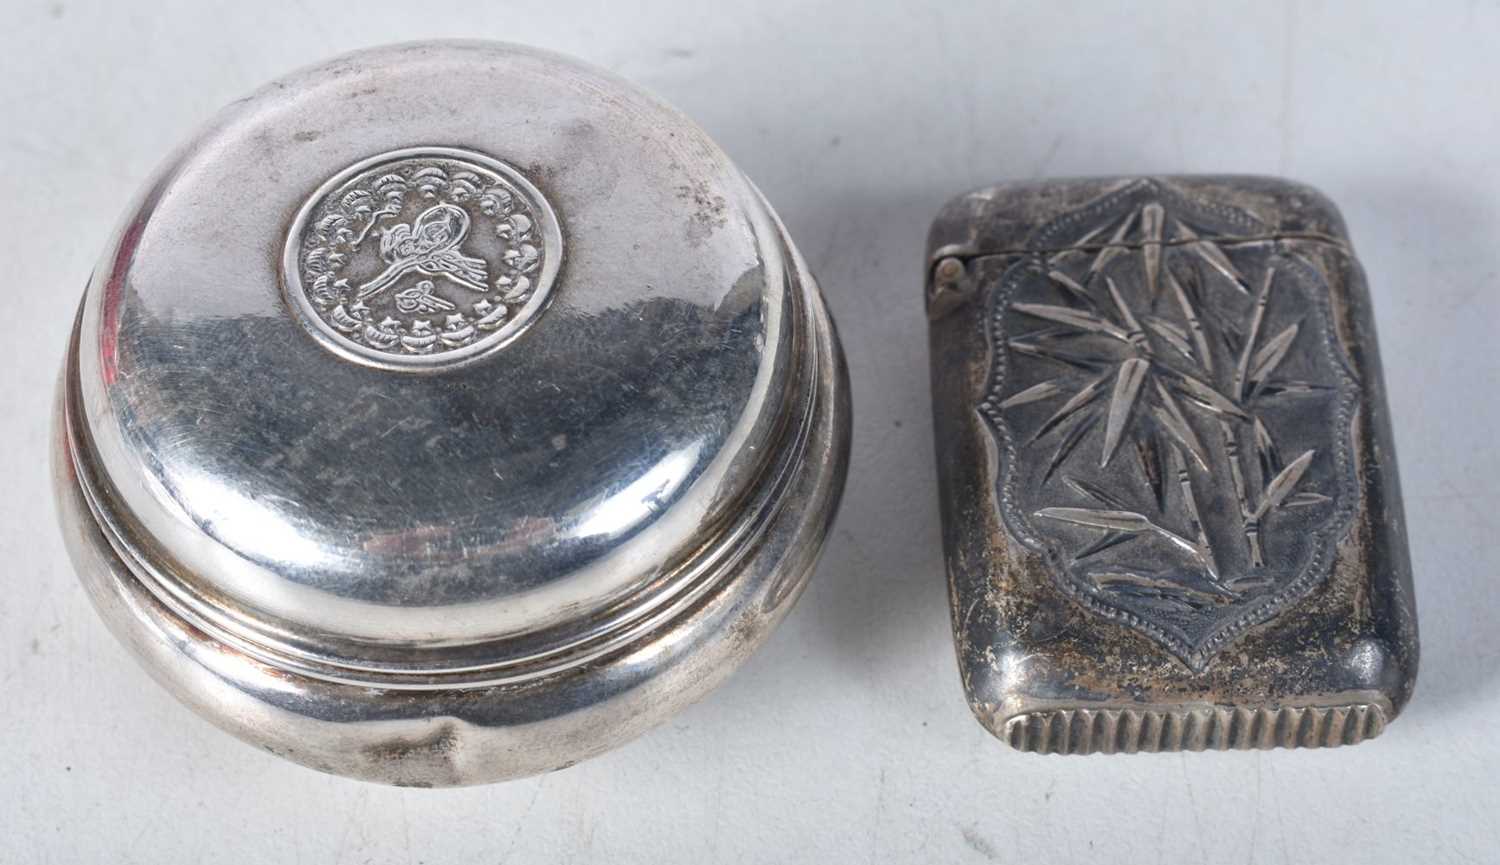 Vintage Silver Trinket/Pill Box Marked MA 900 Turkish Coin together with a Vesta Case with